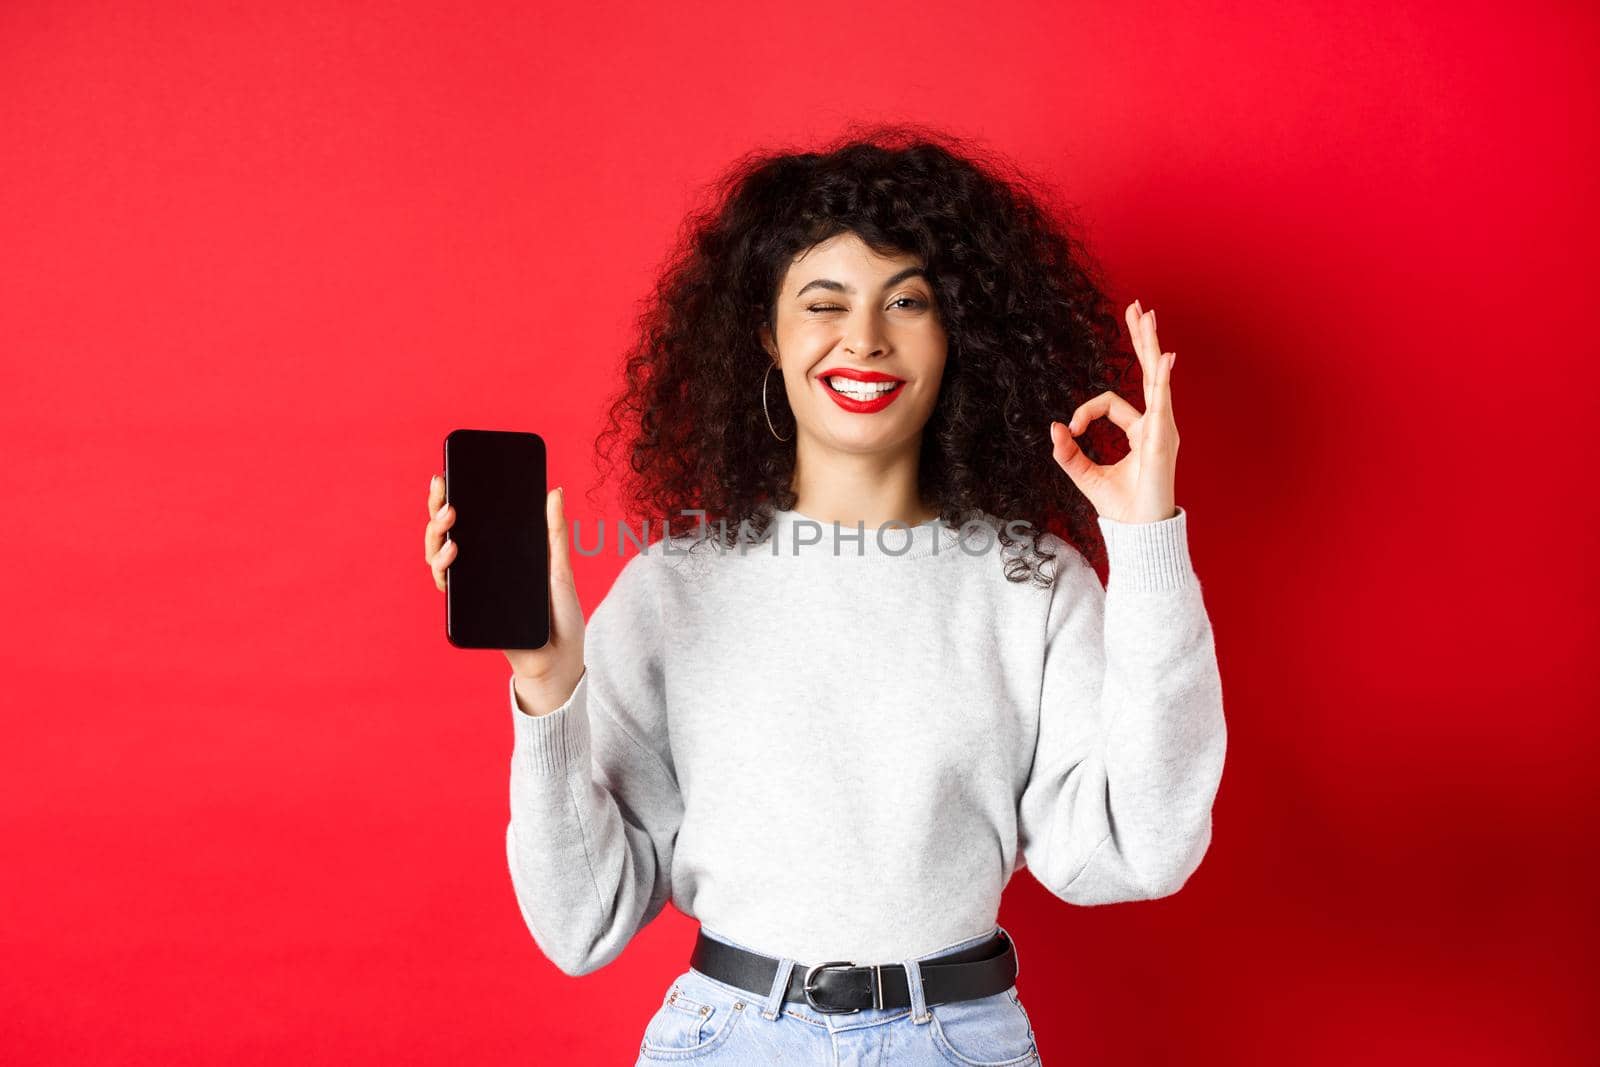 Attractive woman with smartphone, showing okay sign and empty phone sreen, recommending shopping app, standing against red background.